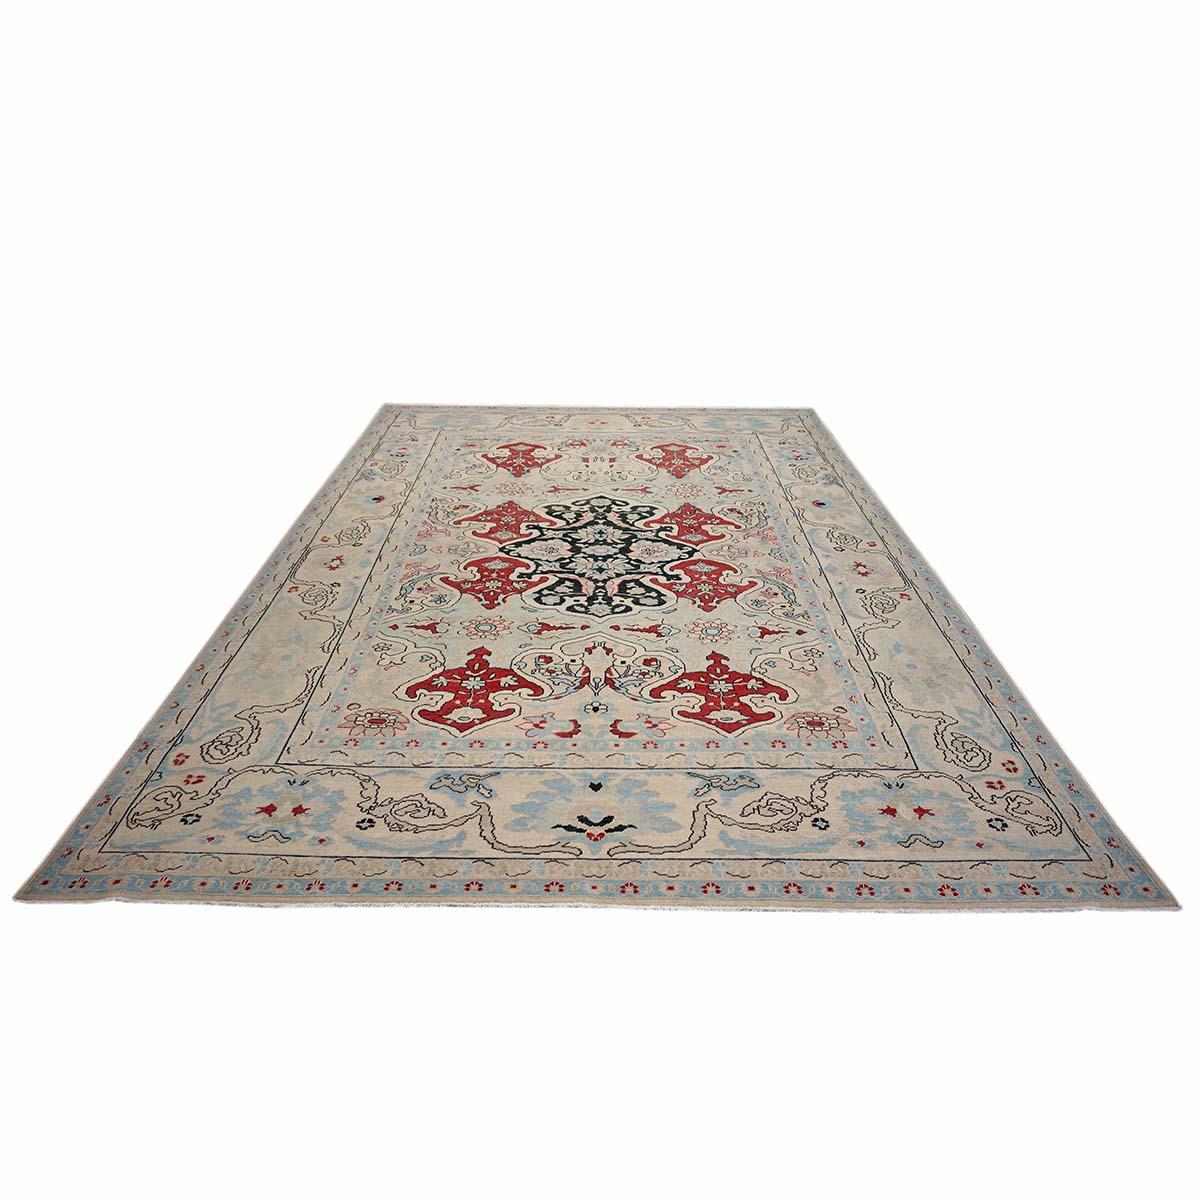 21st Century Persian Sultanabad 10x14 Ivory, Blue, & Red Handmade Area Rug In Excellent Condition For Sale In Houston, TX